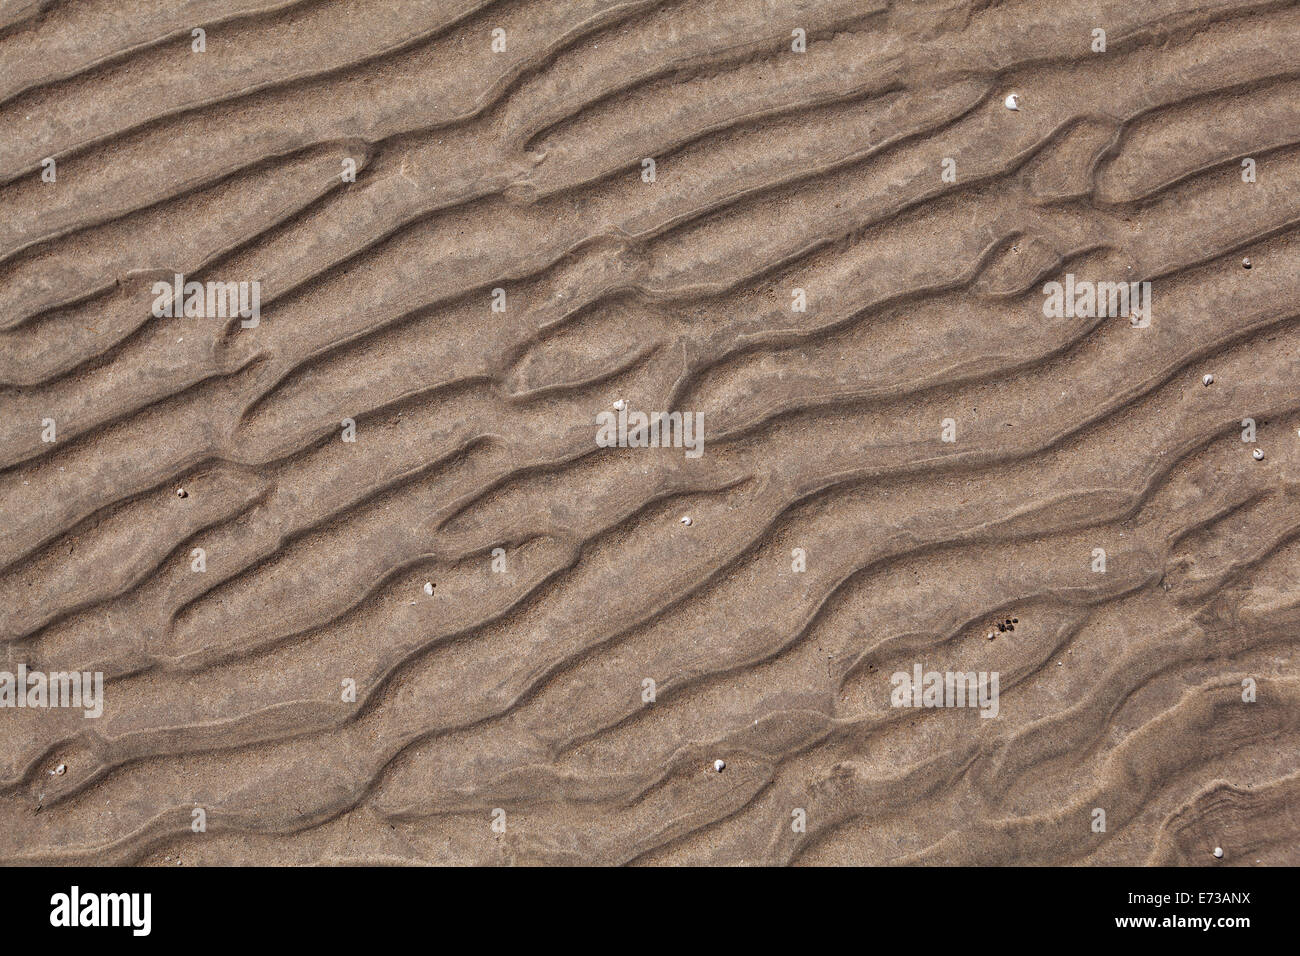 Pattern Of The Sandy Ocean Floor At Low Tide Stock Photo 73218374